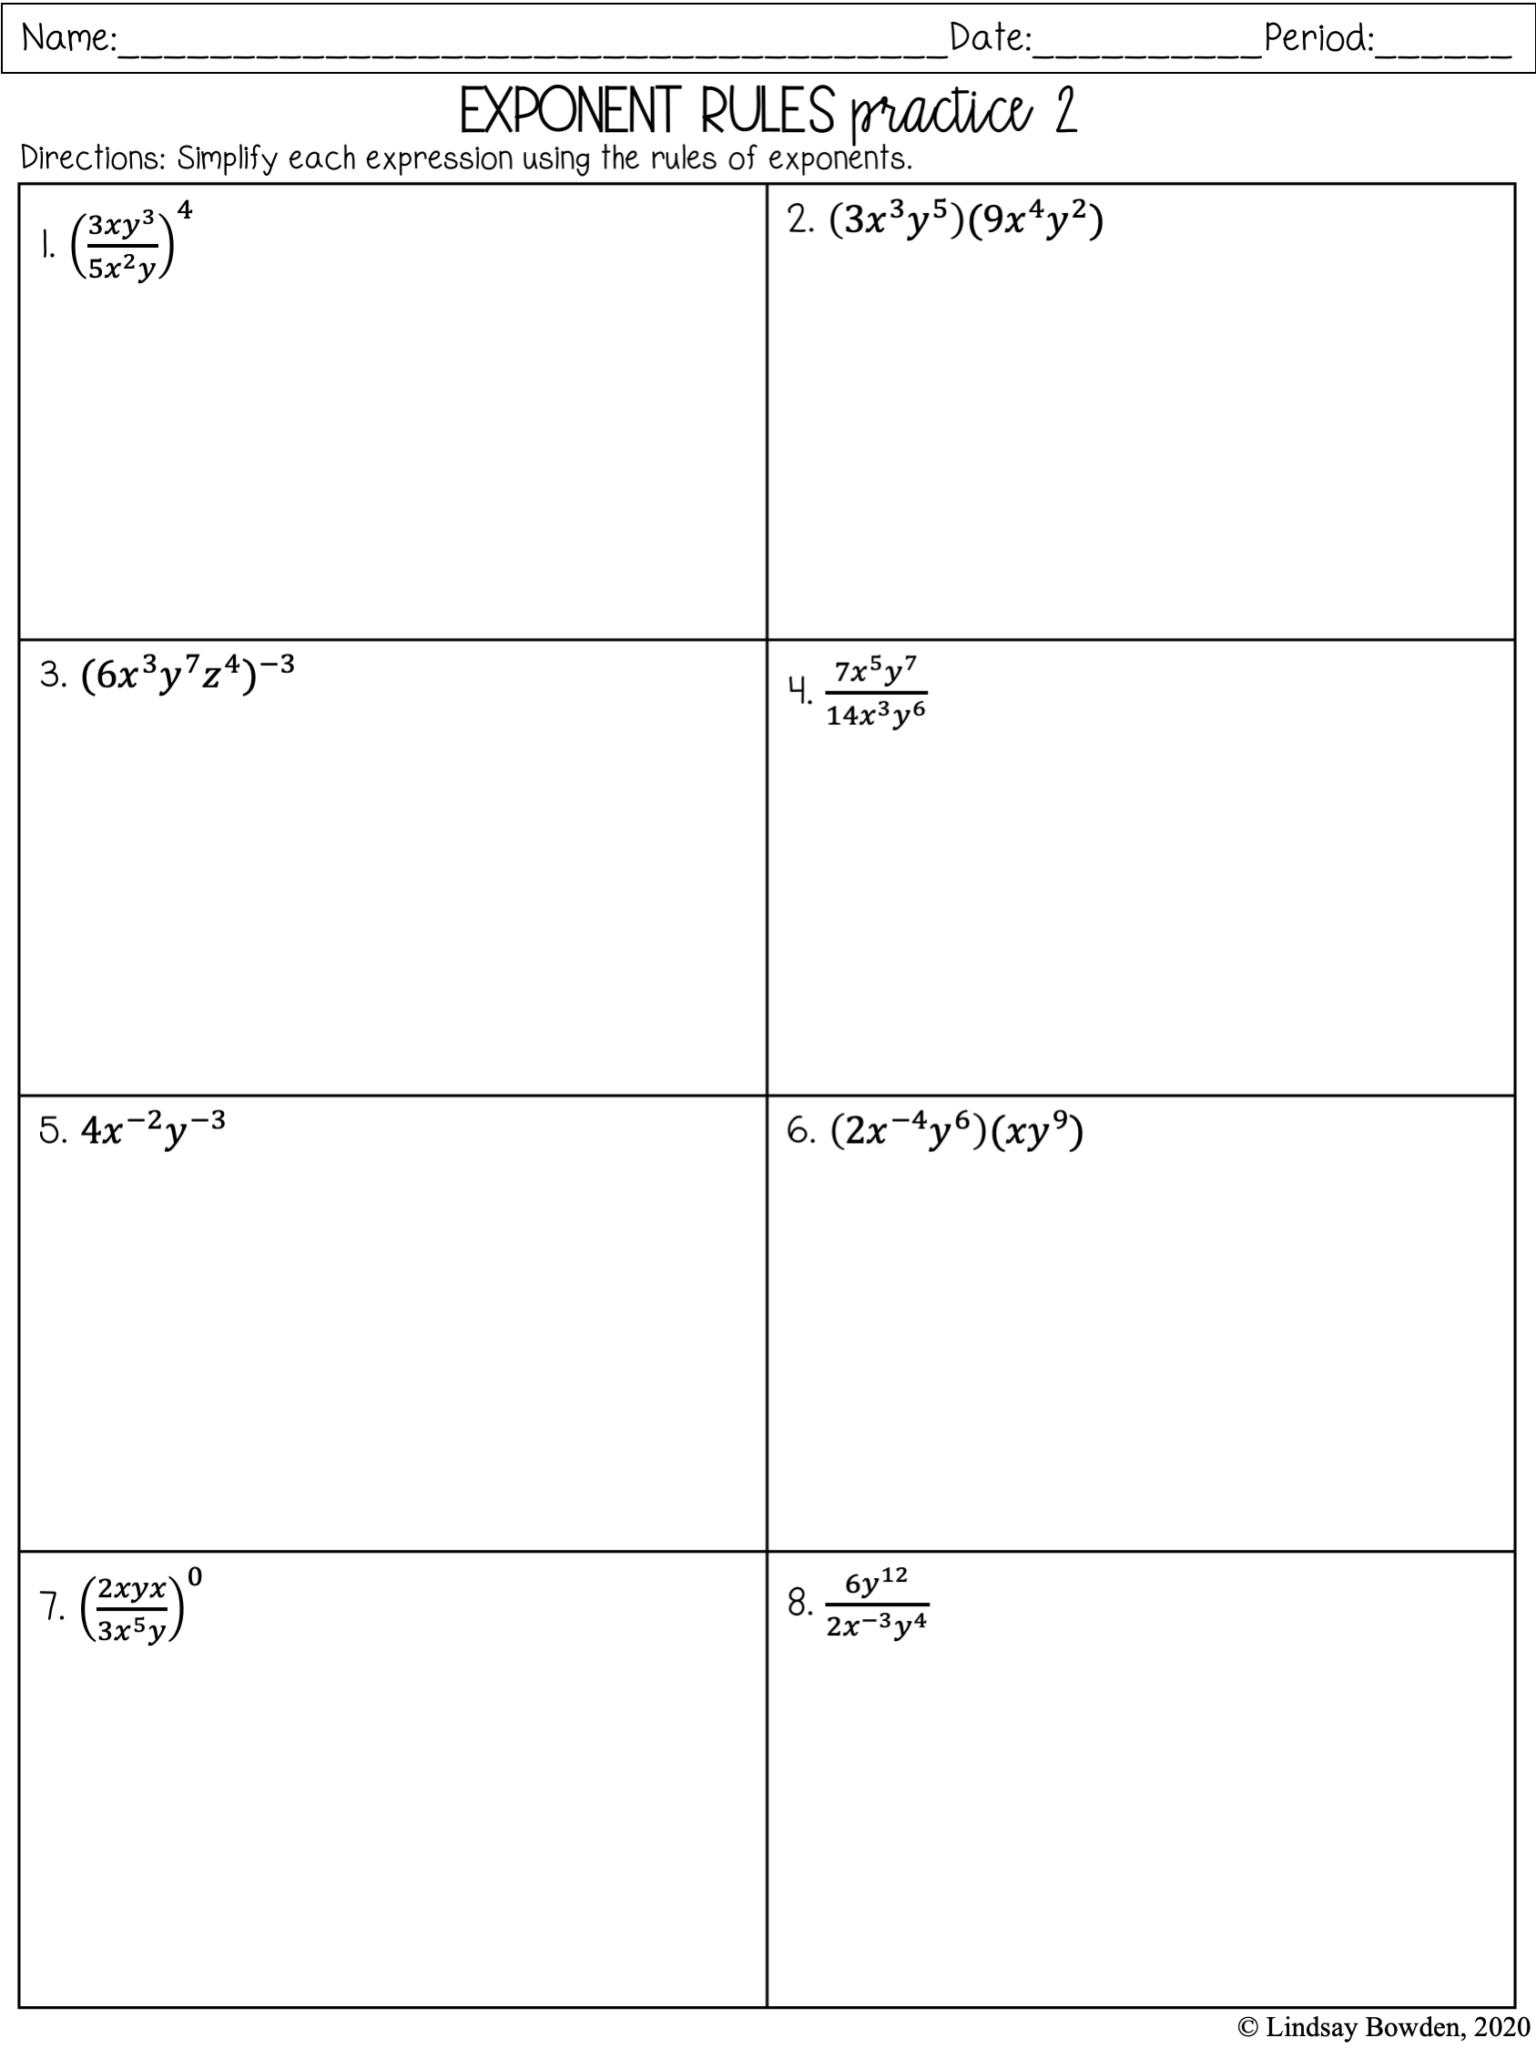 exponent-rules-notes-and-worksheets-lindsay-bowden